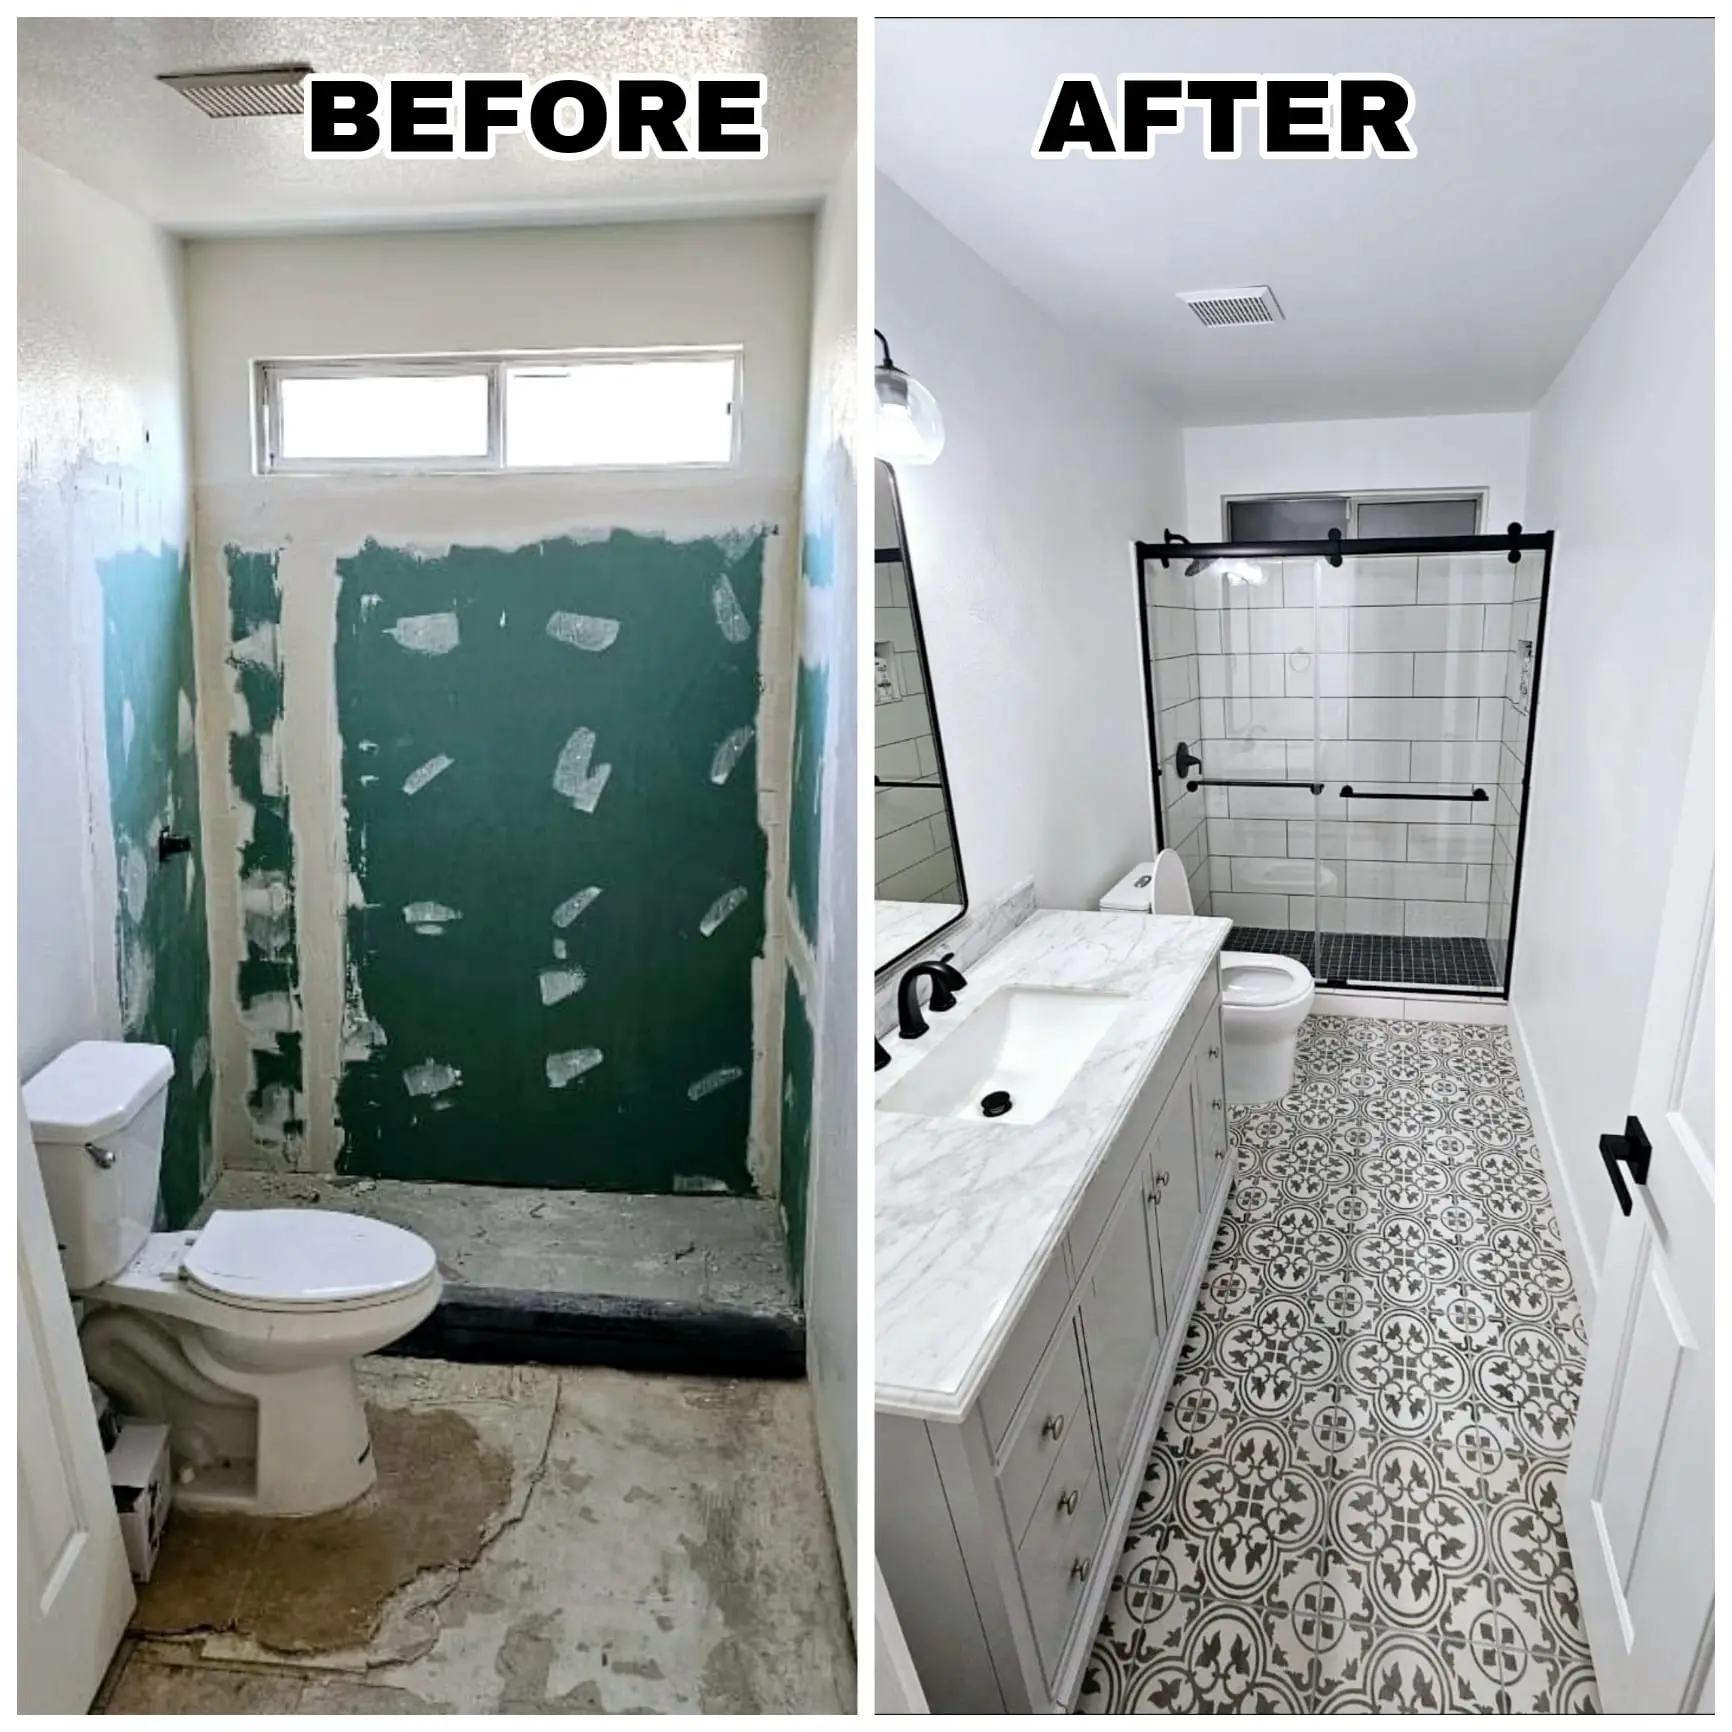 Before and after bathroom renovation project by I AM MAINTENANCE, LLC